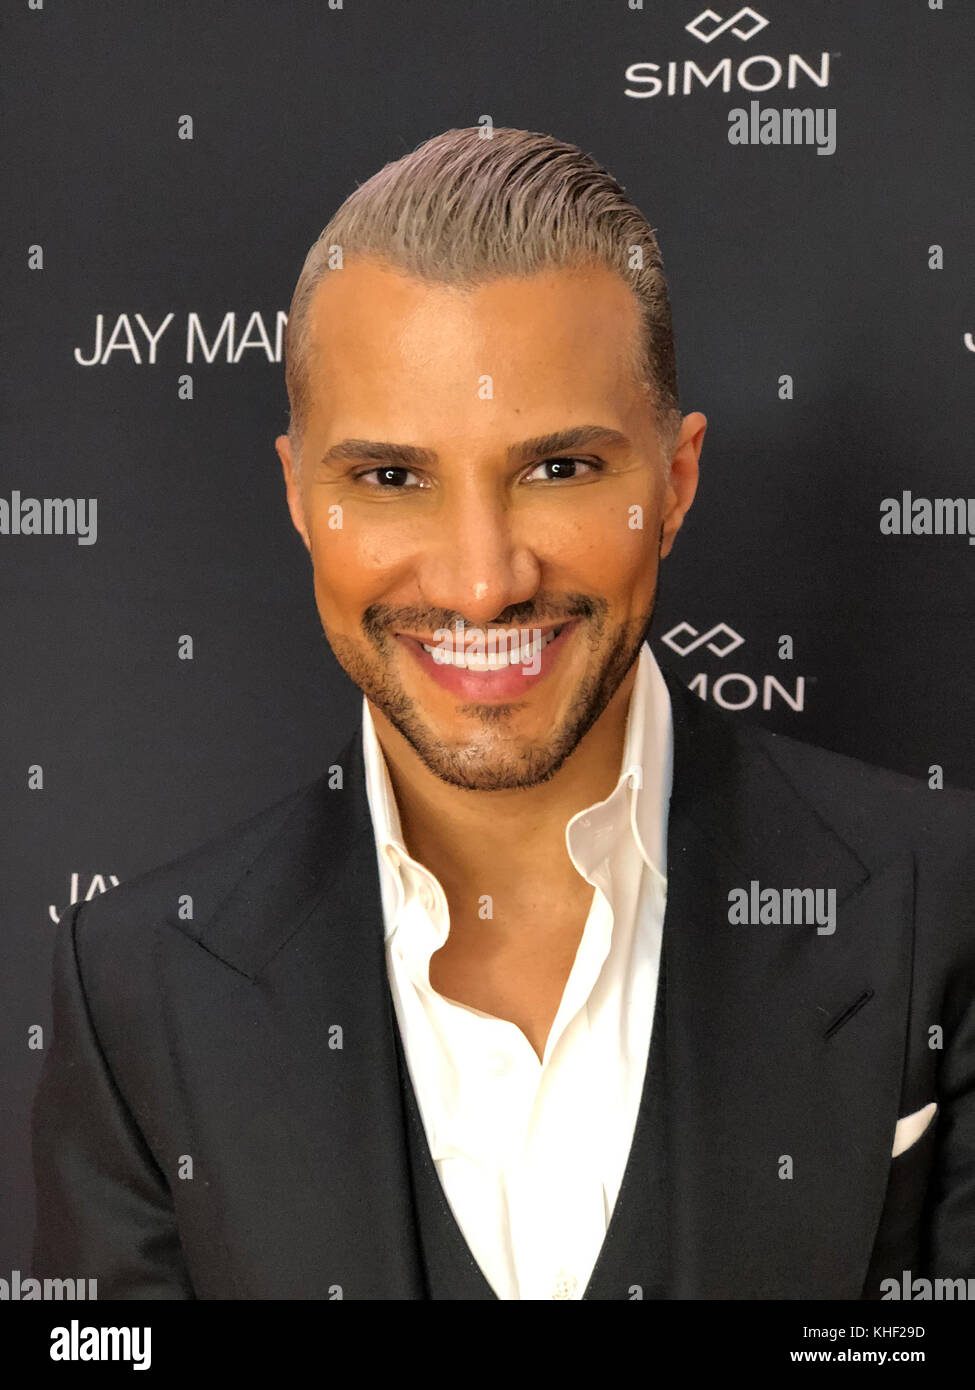 Garden City, New York, USA. 16th Nov, 2017. JAY MANUEL, 45, makeup artist and stylist, appears at Roosevelt Field Mall to celebrate the Grand Opening and World Premier of his Jay Manuel Beauty Retail Experience, with additional retail spaces scheduled to open in 2018. The physical store locations, in busy common areas of Simon shopping centers exclusively, will carry his entire beauty product line. Manuel is famous as the former creative director of the reality television show 'America's Next Top Model. Credit: Ann Parry/ZUMA Wire/Alamy Live News Stock Photo